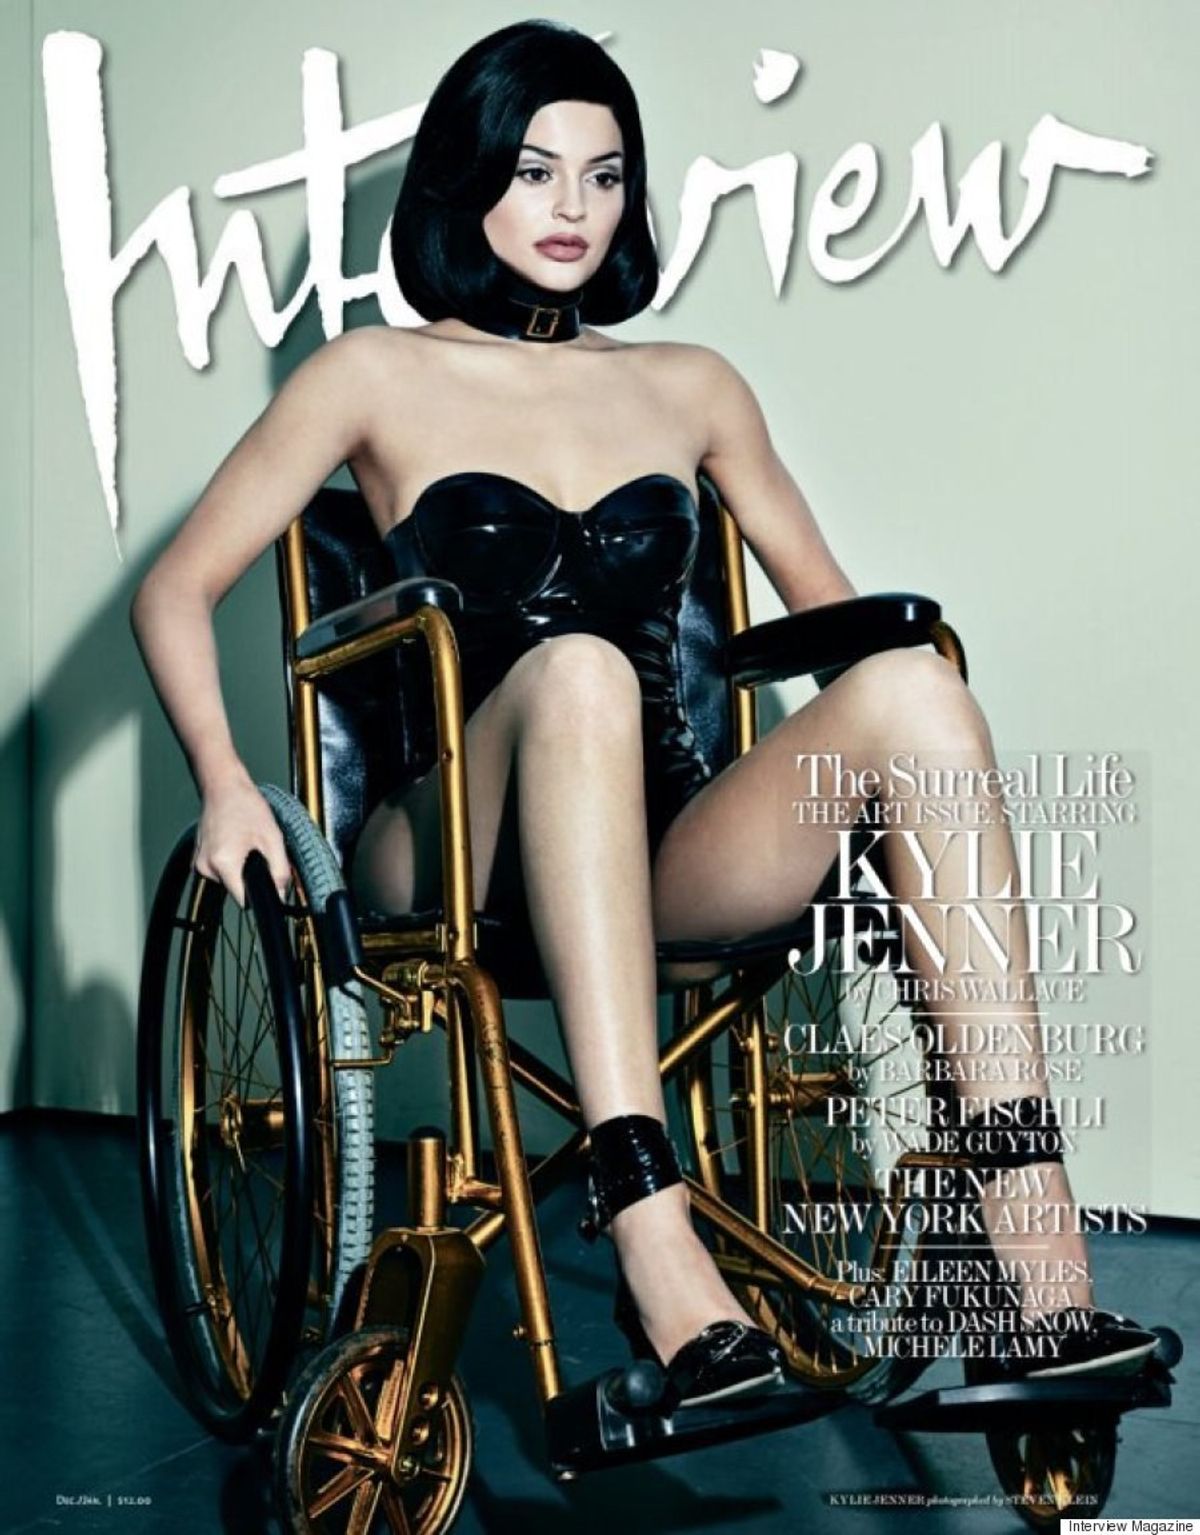 Dear Kylie Jenner And Interview Magazine: Your Prop Is My Reality